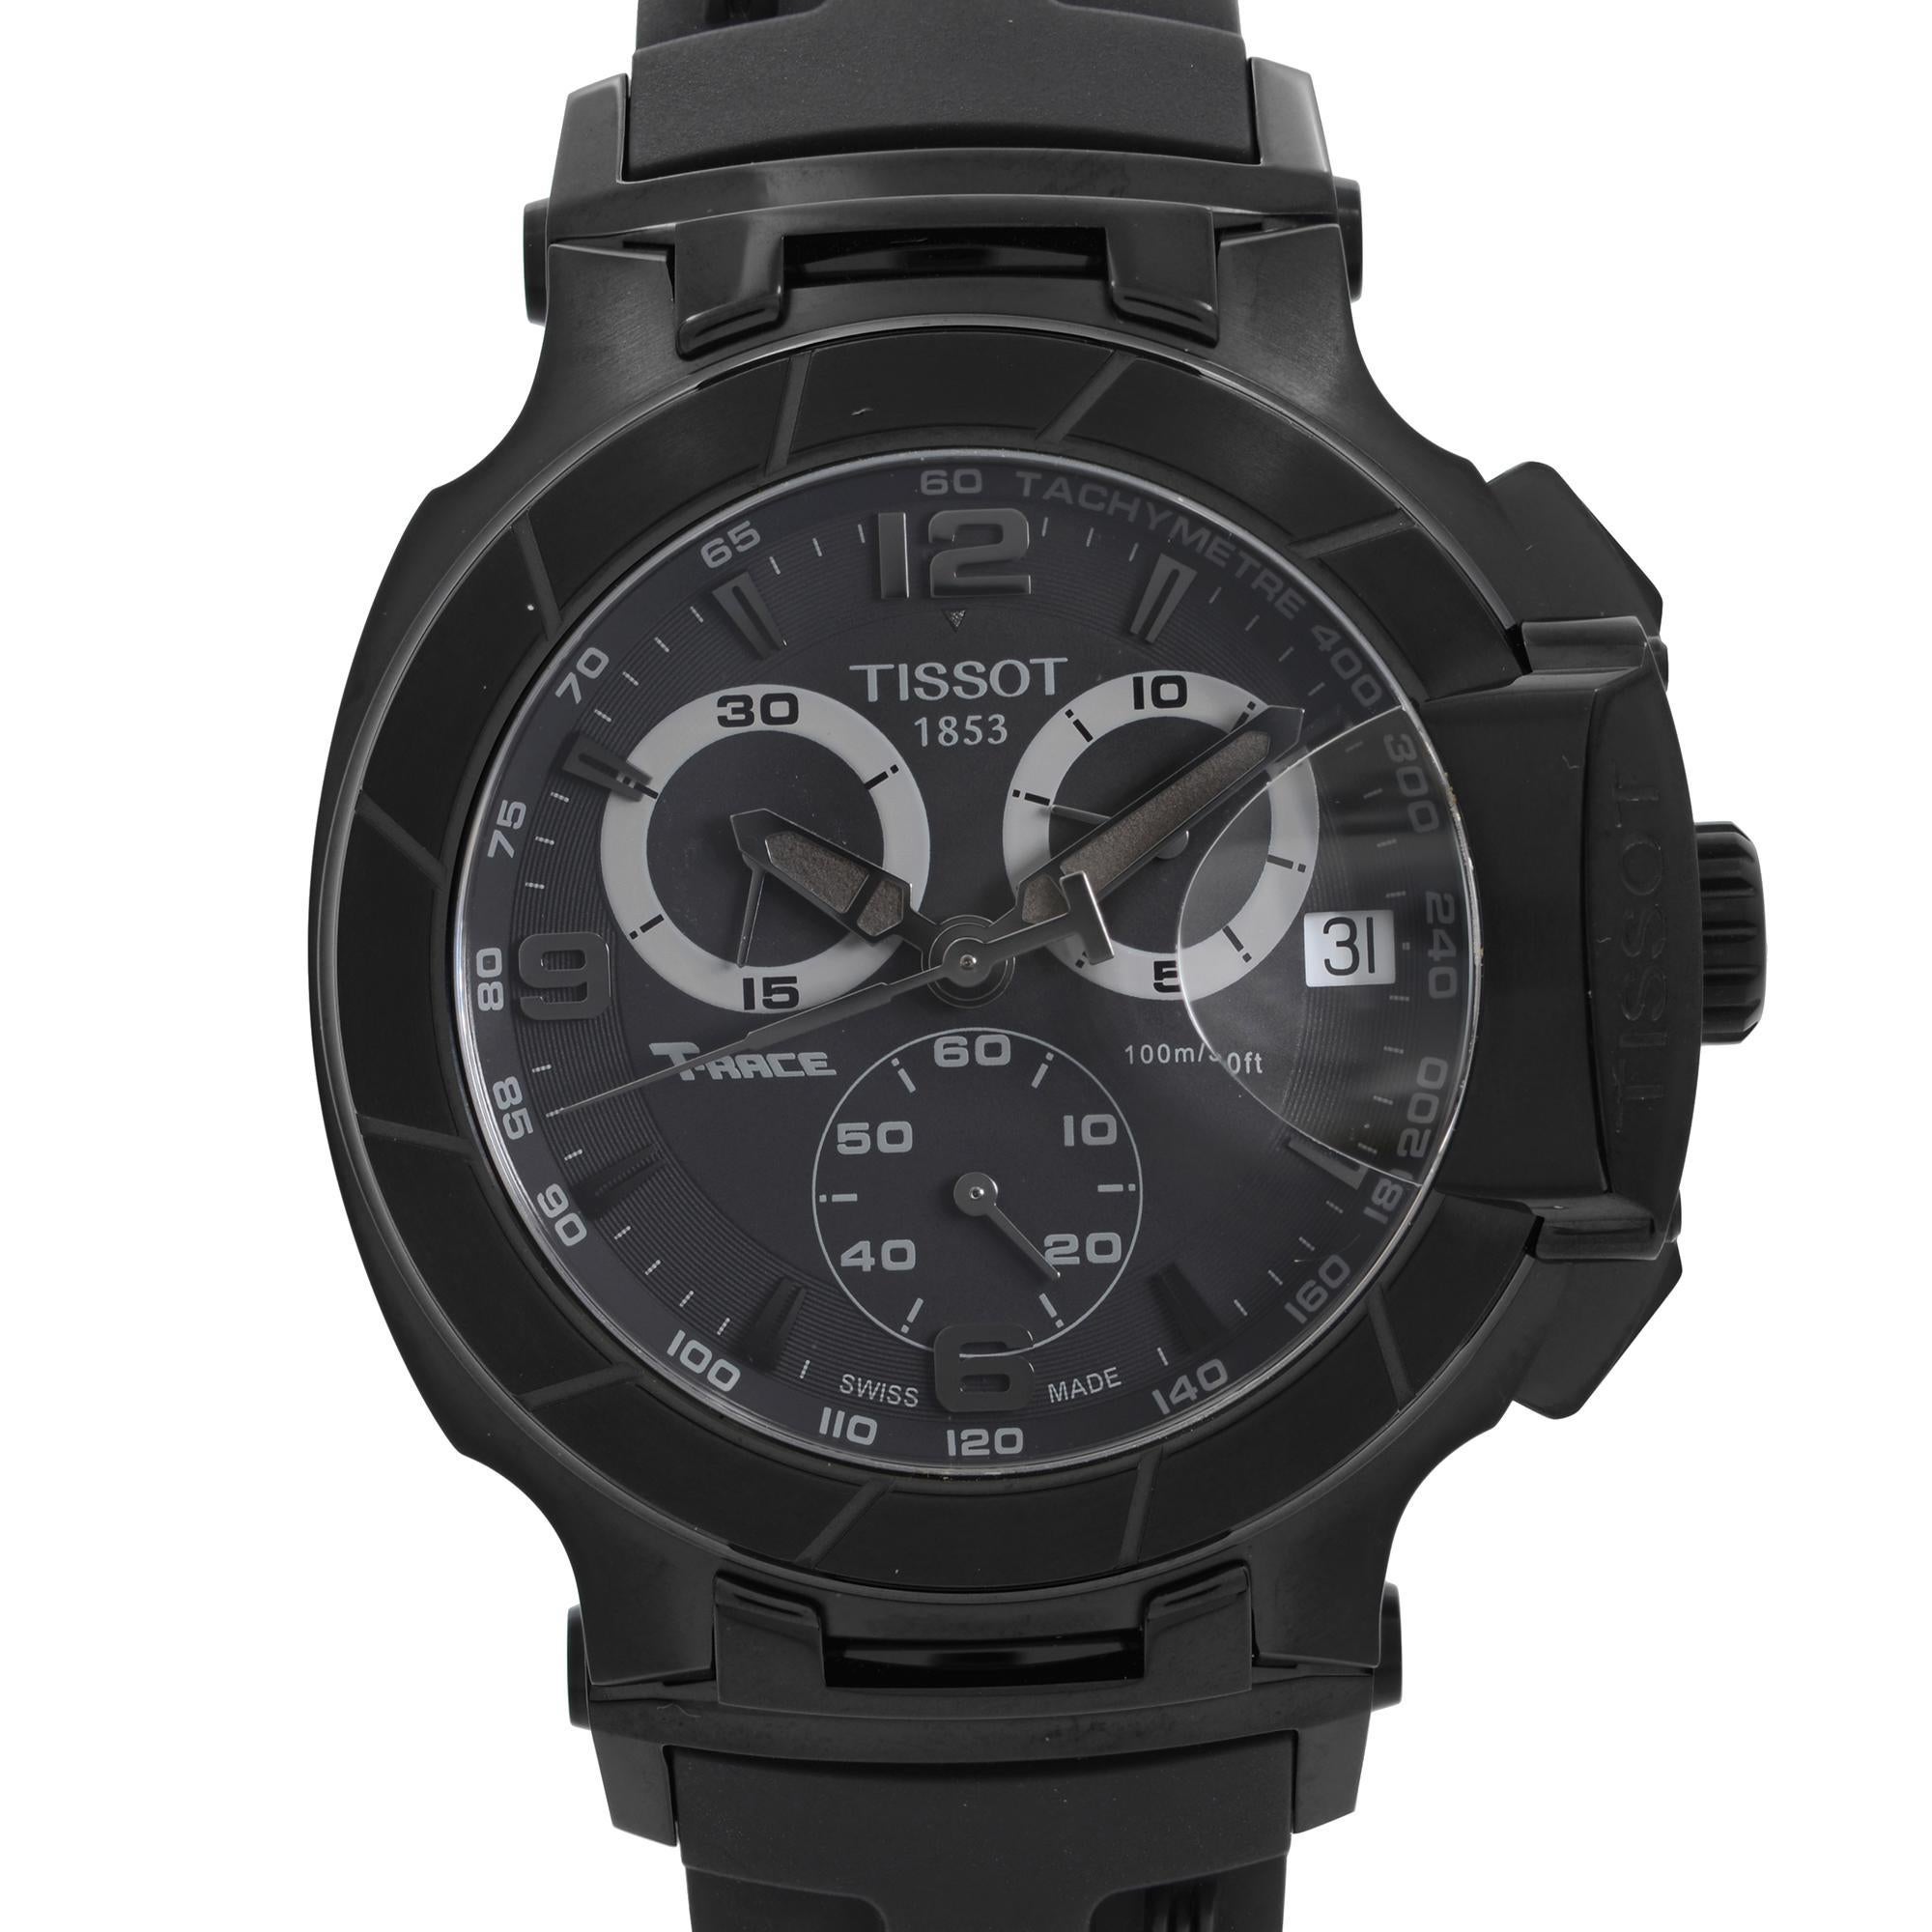 New with Defects Tissot T-Race Men's Watch T048.417.37.057.00. The Watch has a few Very Tiny Scratches on the Case and Bezel Visible Under Closer Inspection. This Beautiful Timepiece is Powered by a Quartz (Battery) Movement and Features: Black PVD